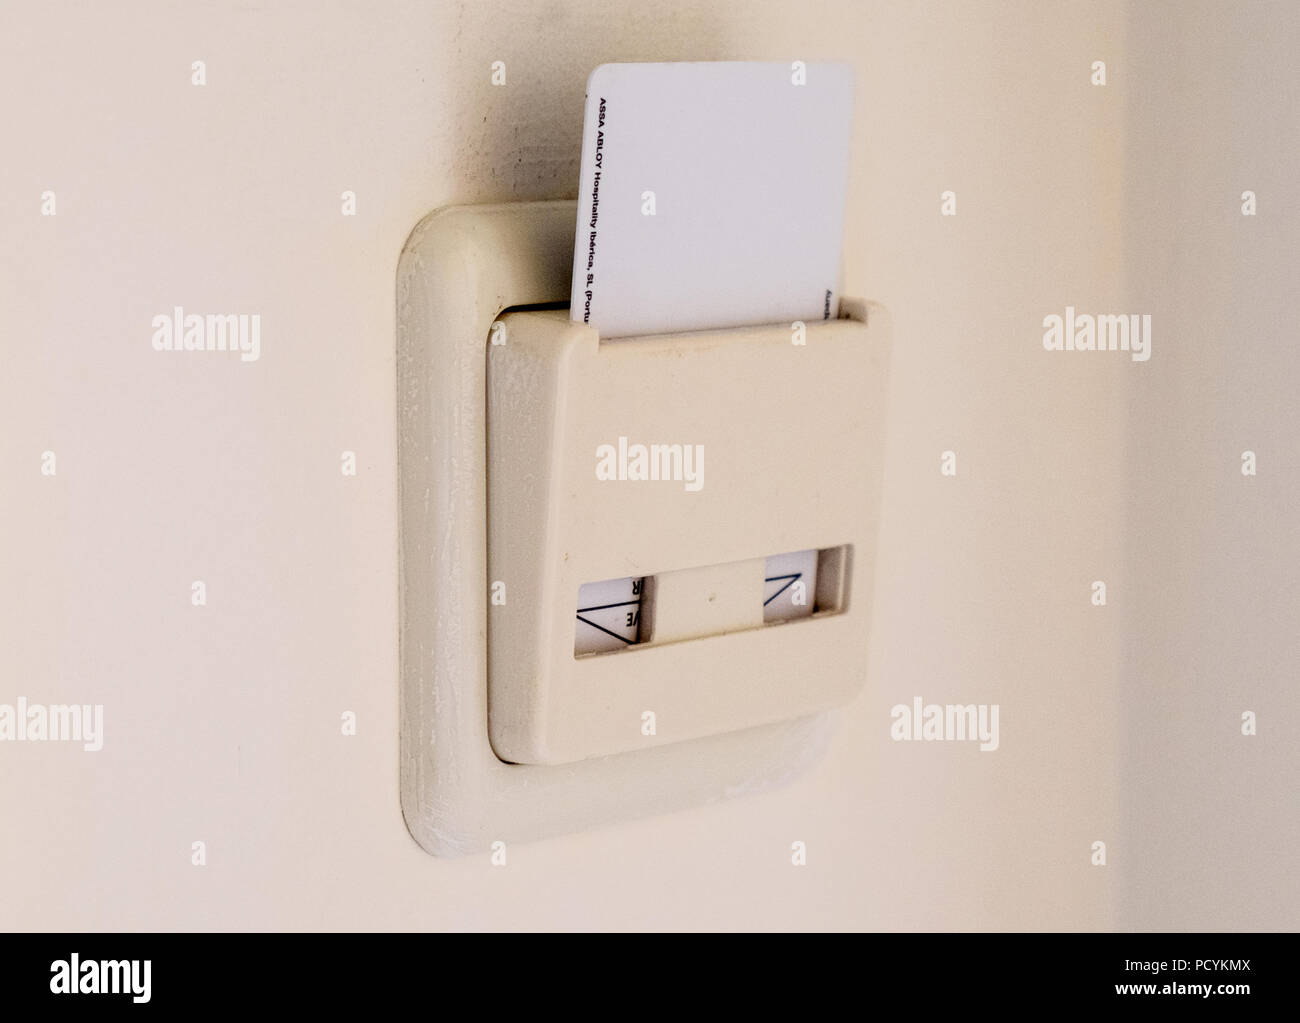 Hotel key card placed into a room switch to turn on the power Stock Photo